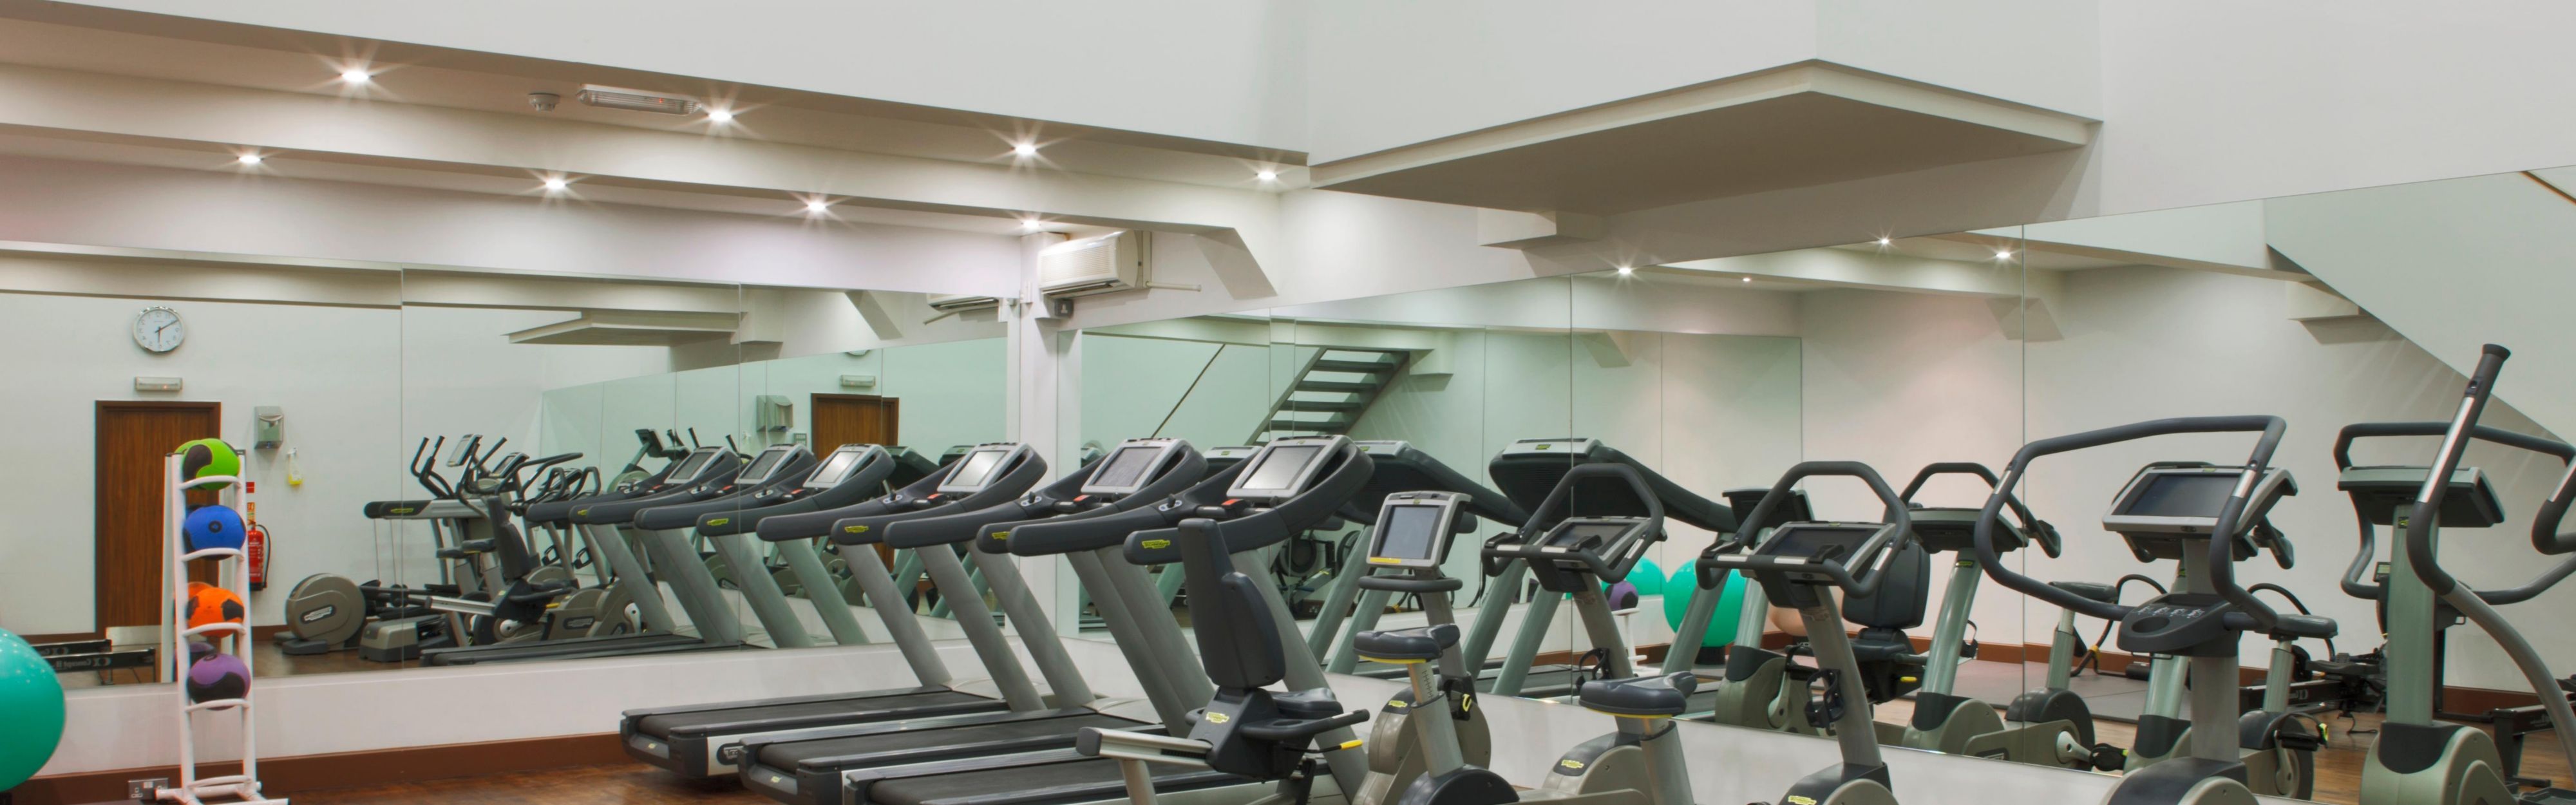 Work up a sweat in our fitness center in central London.